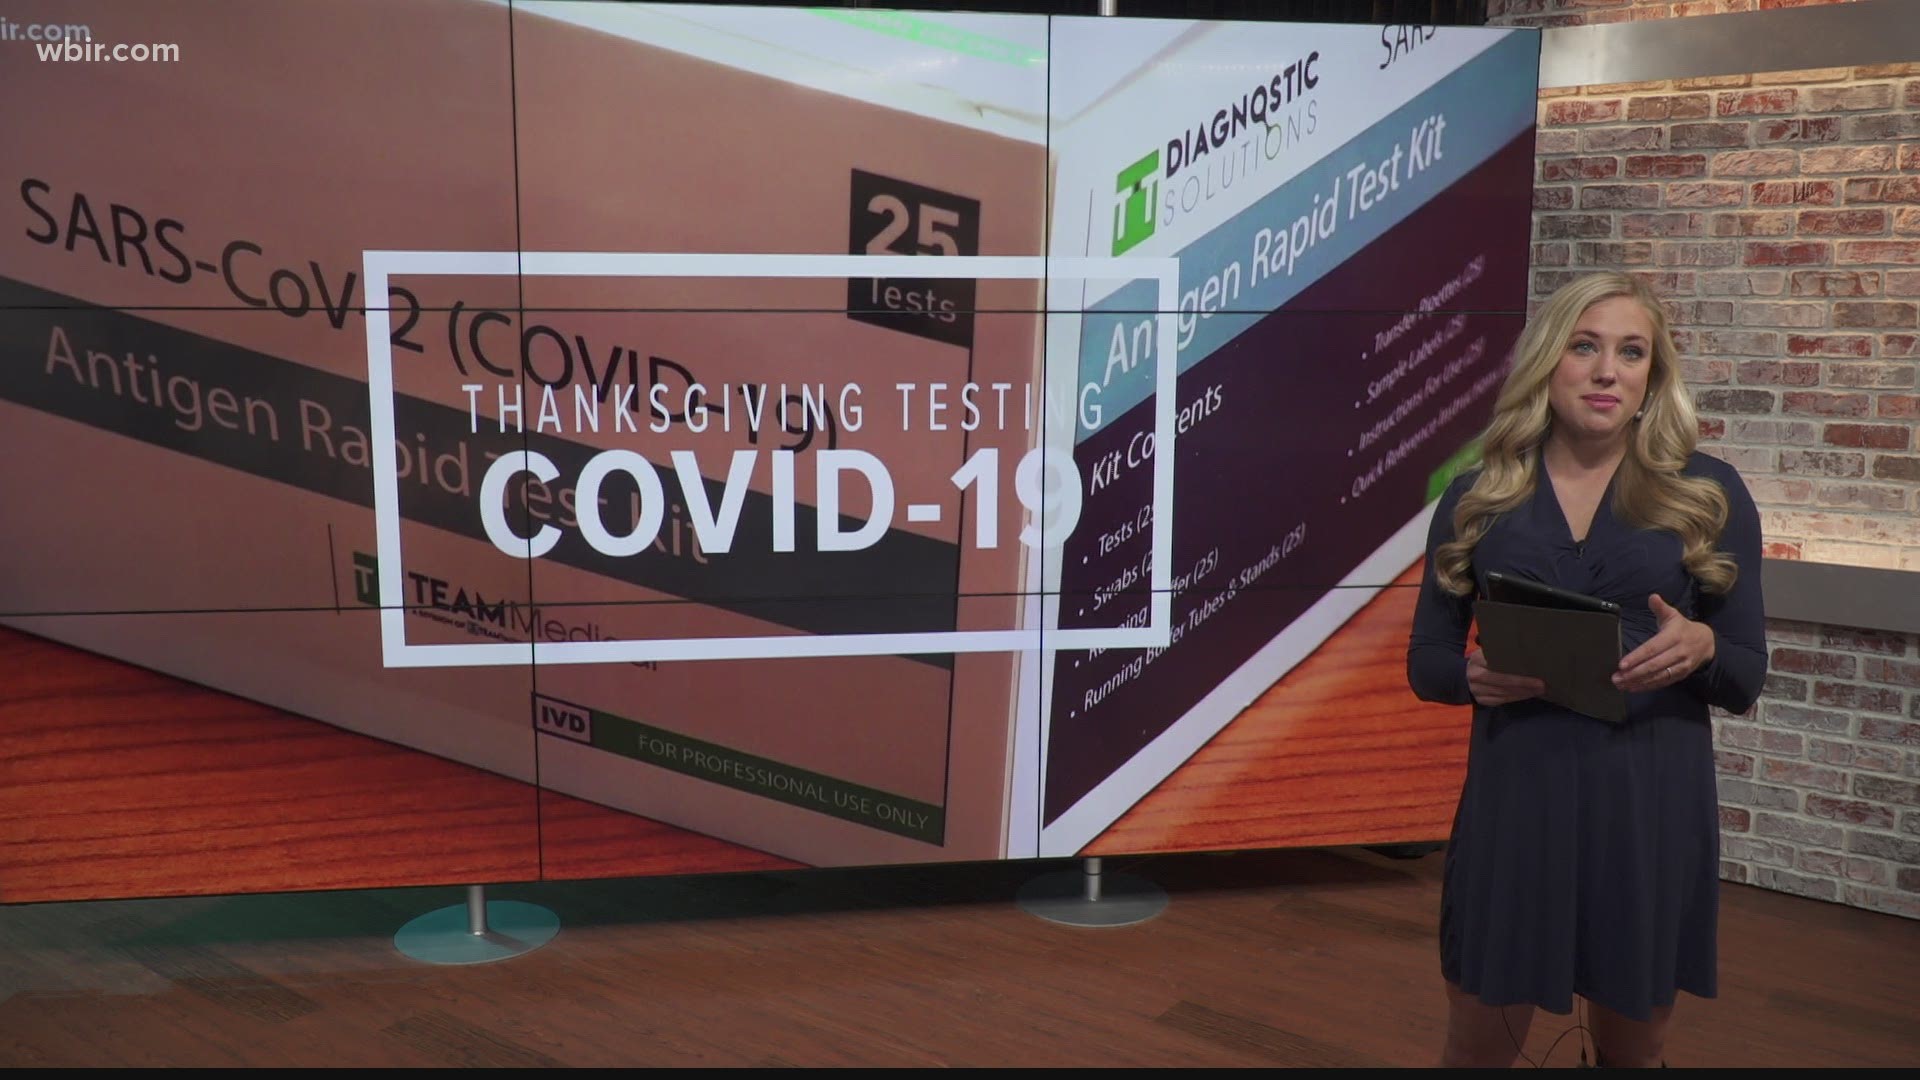 The Knox County Health Department said it's seeing the highest COVID-19 testing numbers since the start of the pandemic ahead of Thanksgiving.